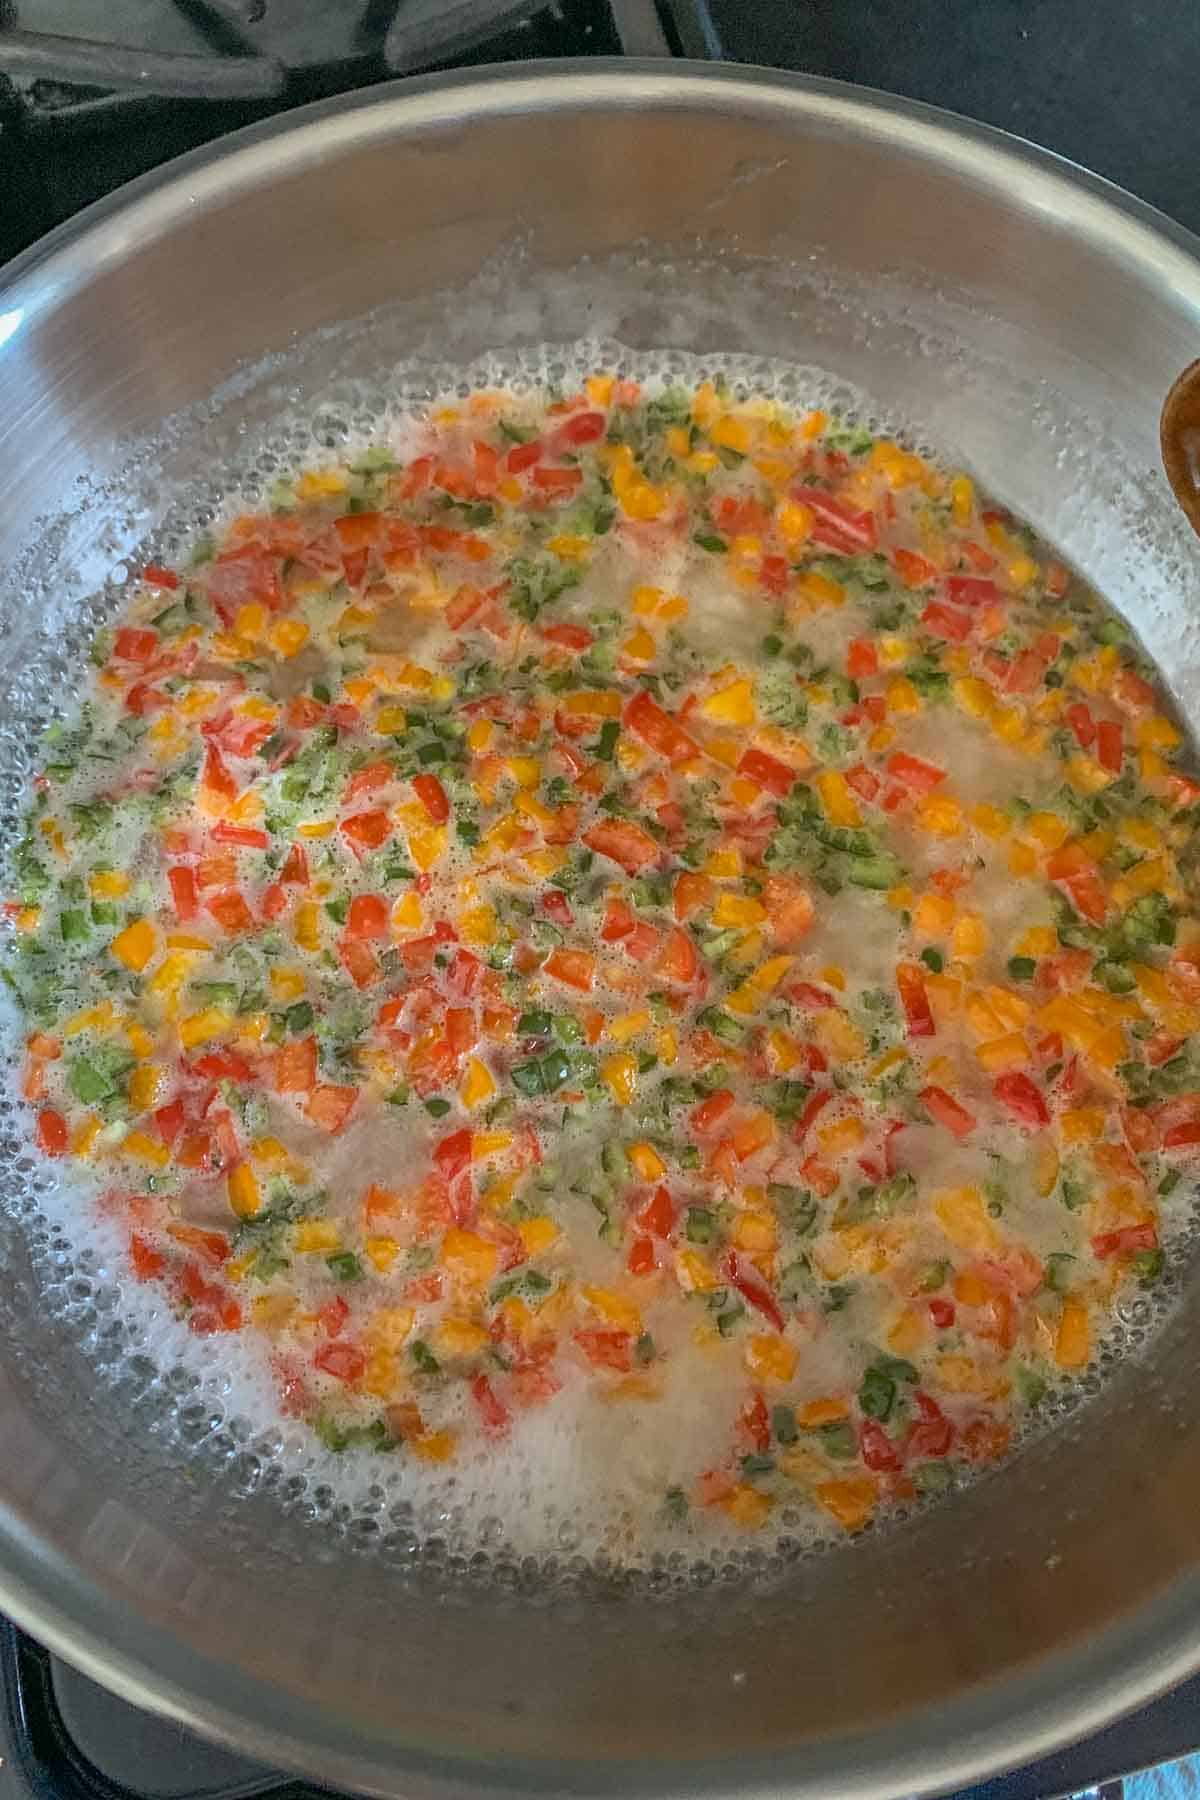 Boiling jalapeño jelly in a stainless pan.